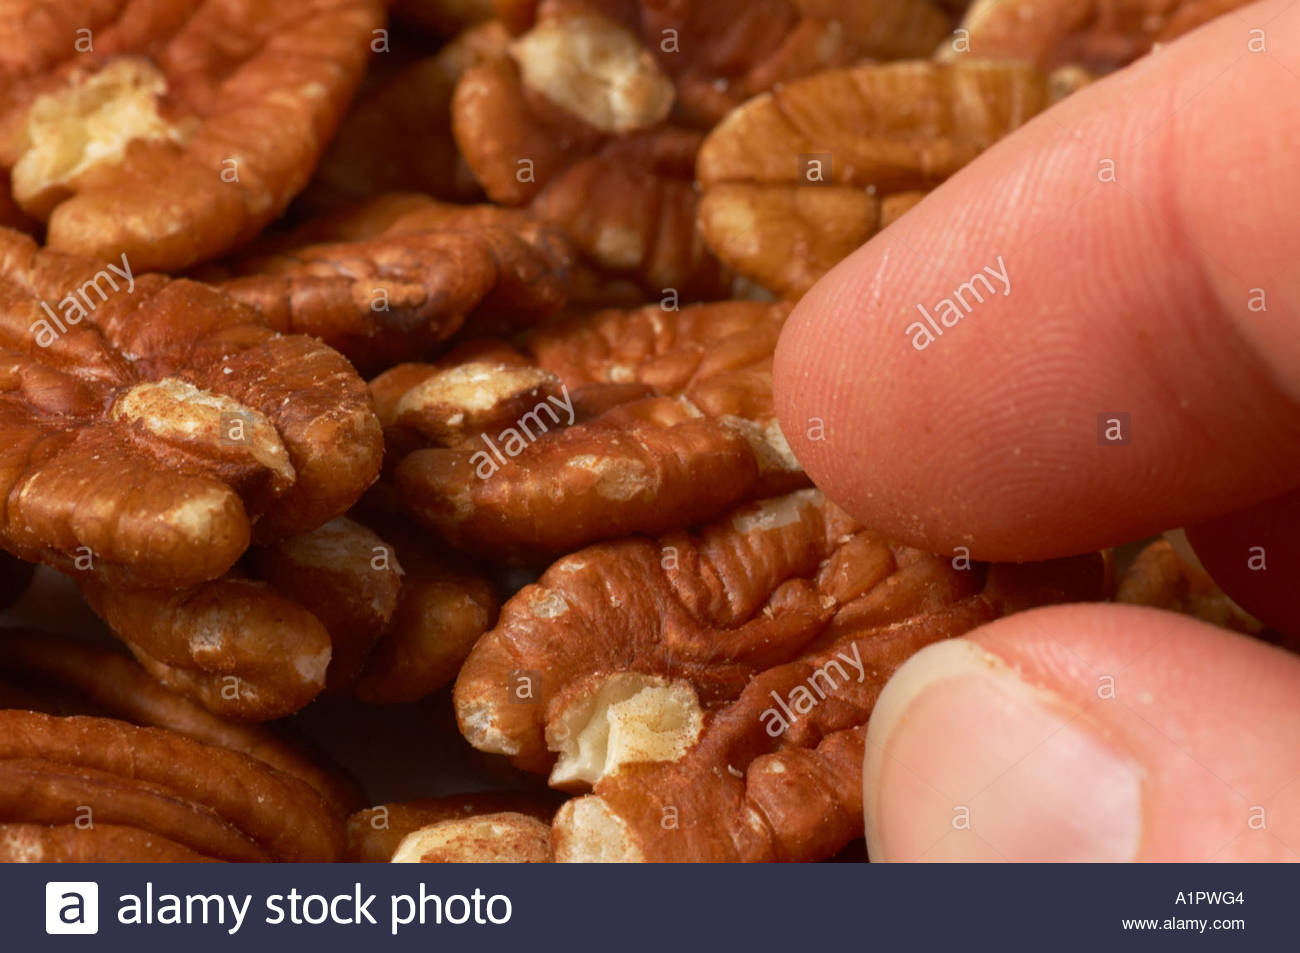 Picking up a pecan nut Stock Photo